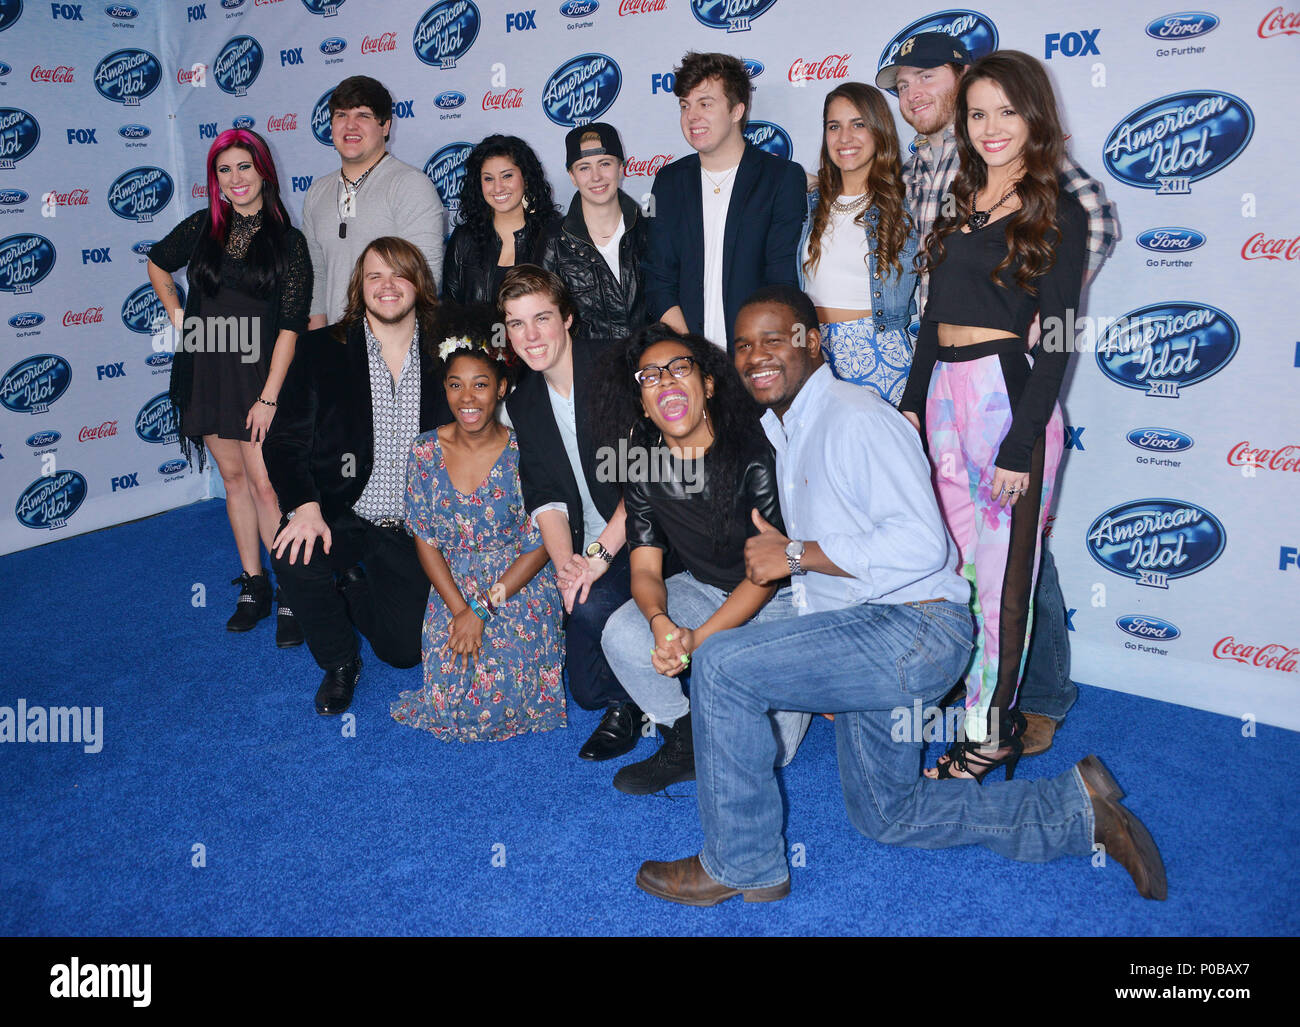 ZD8 8448 at the American Idol X!!! Finalists Party-2014 at the Fig & Olive Restaurant in Los Angeles. Finalists Jessica Meuse, Dexter Roberts, Jena Irene, MK Nobilette, Alex Preston, Emily Piriz, Ben Briley, Kristen O'Connor (Bottom L-R) Caleb Johnson, Malaya Watson, Sam Woolf, Majesty Rose and C.J. Harris attends FOX's 'American Idol XIII' finalists party at Fig & Olive Melrose PlaceThirteen Finalists 315  Event in Hollywood Life - California, Red Carpet Event, USA, Film Industry, Celebrities, Photography, Bestof, Arts Culture and Entertainment, Topix Celebrities fashion, Best of, Hollywood L Stock Photo